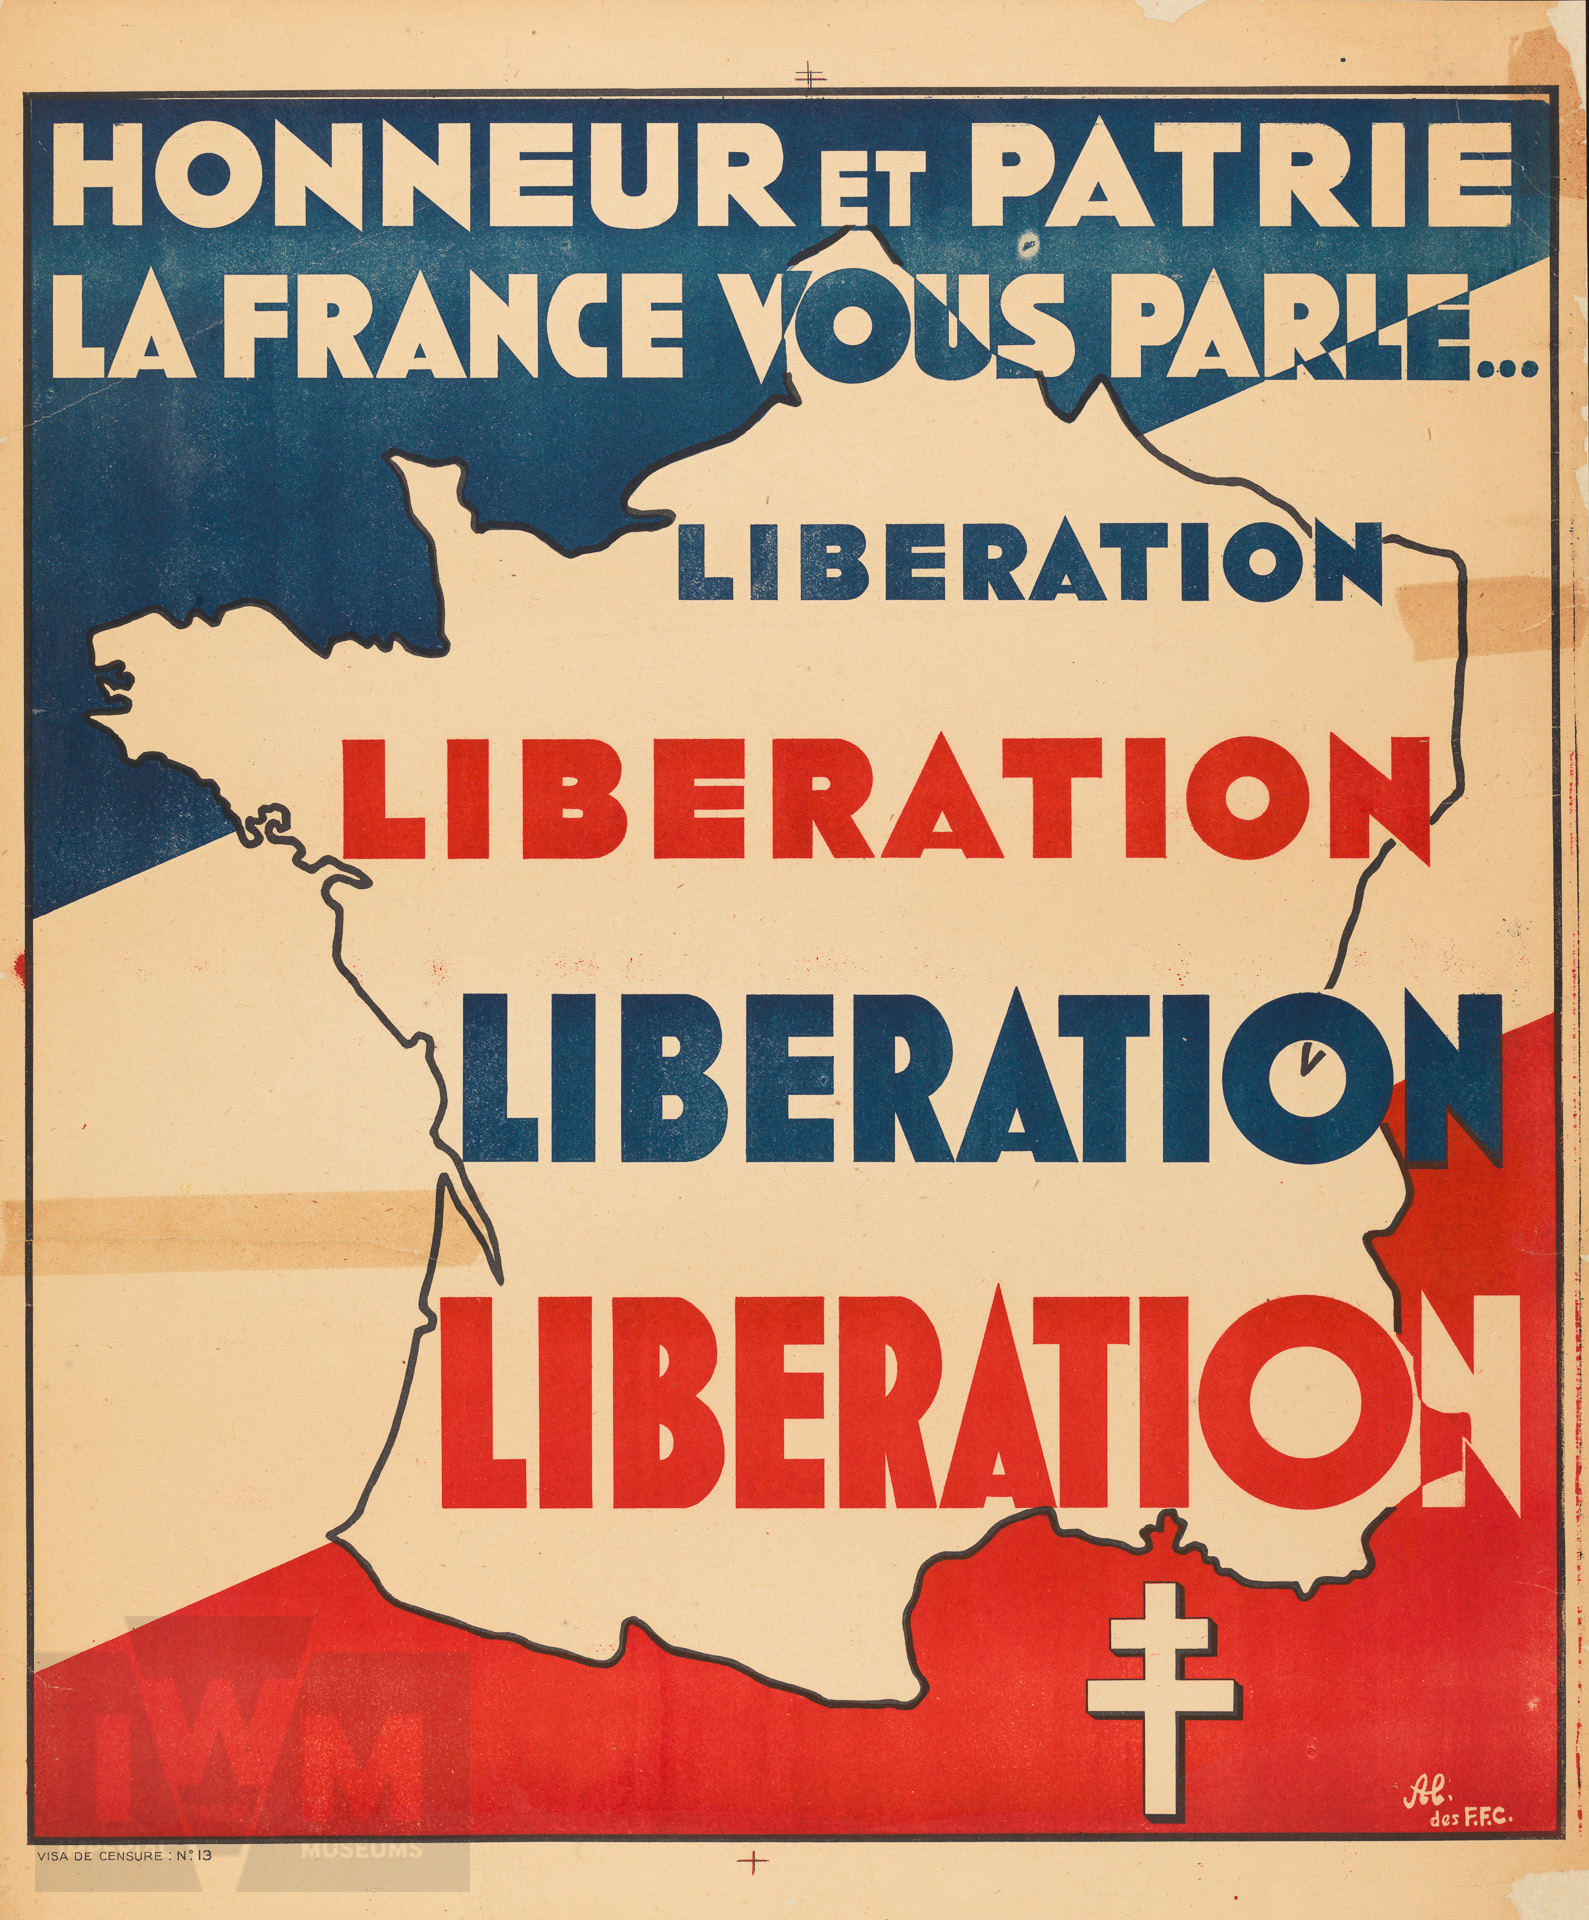 Recruiting poster for the Free French Forces, 1944, stating “Honor and Country. France Speaks to You.” (Imperial War Museum: Art.IWM PST 3104)